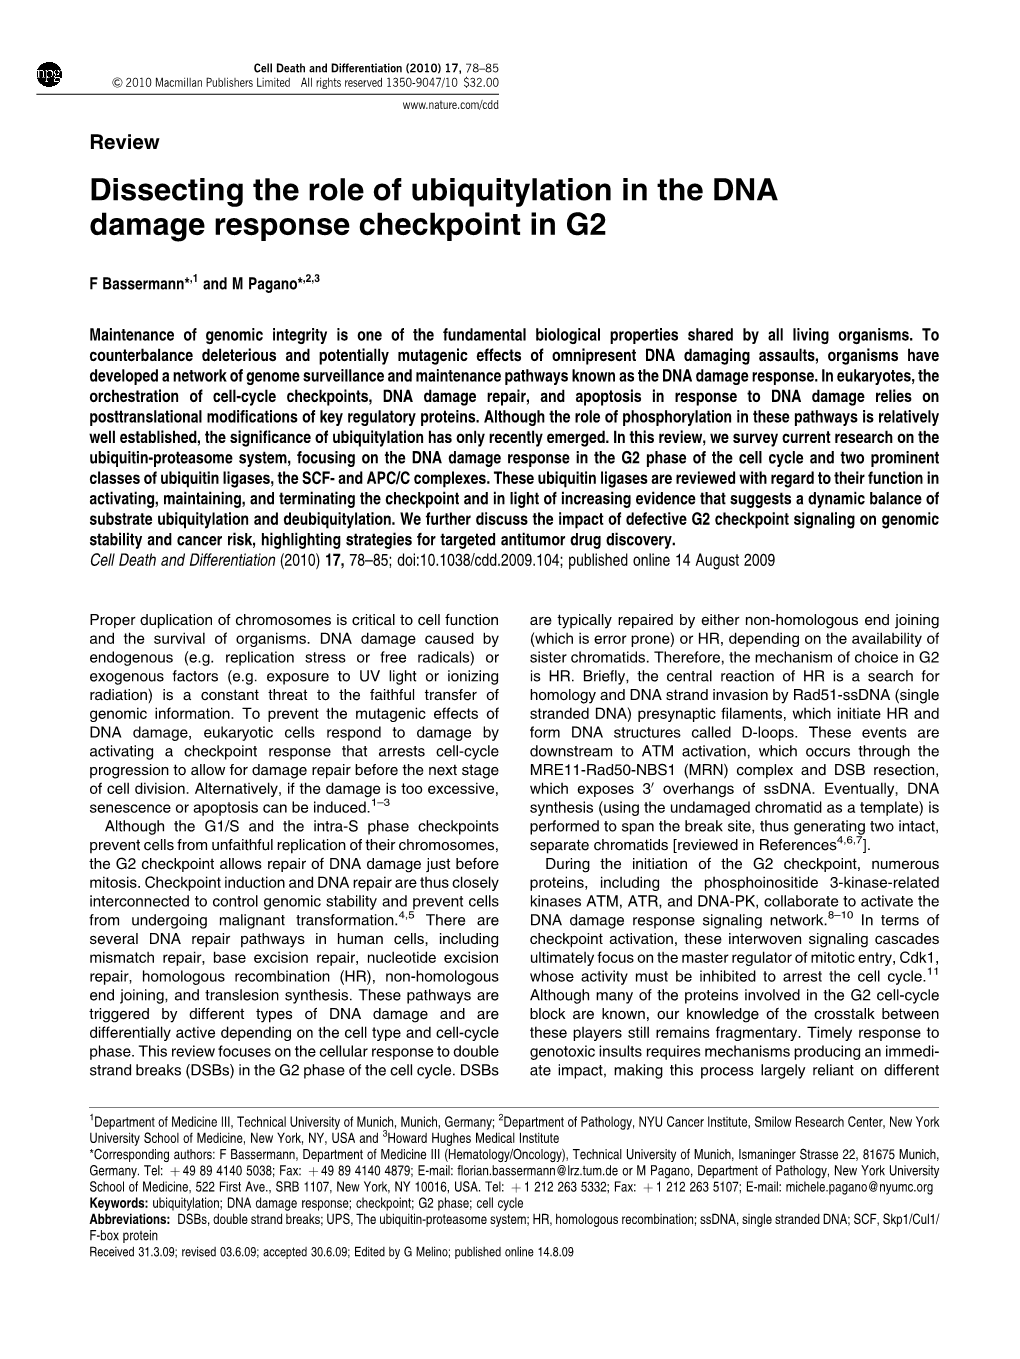 Dissecting the Role of Ubiquitylation in the DNA Damage Response Checkpoint in G2